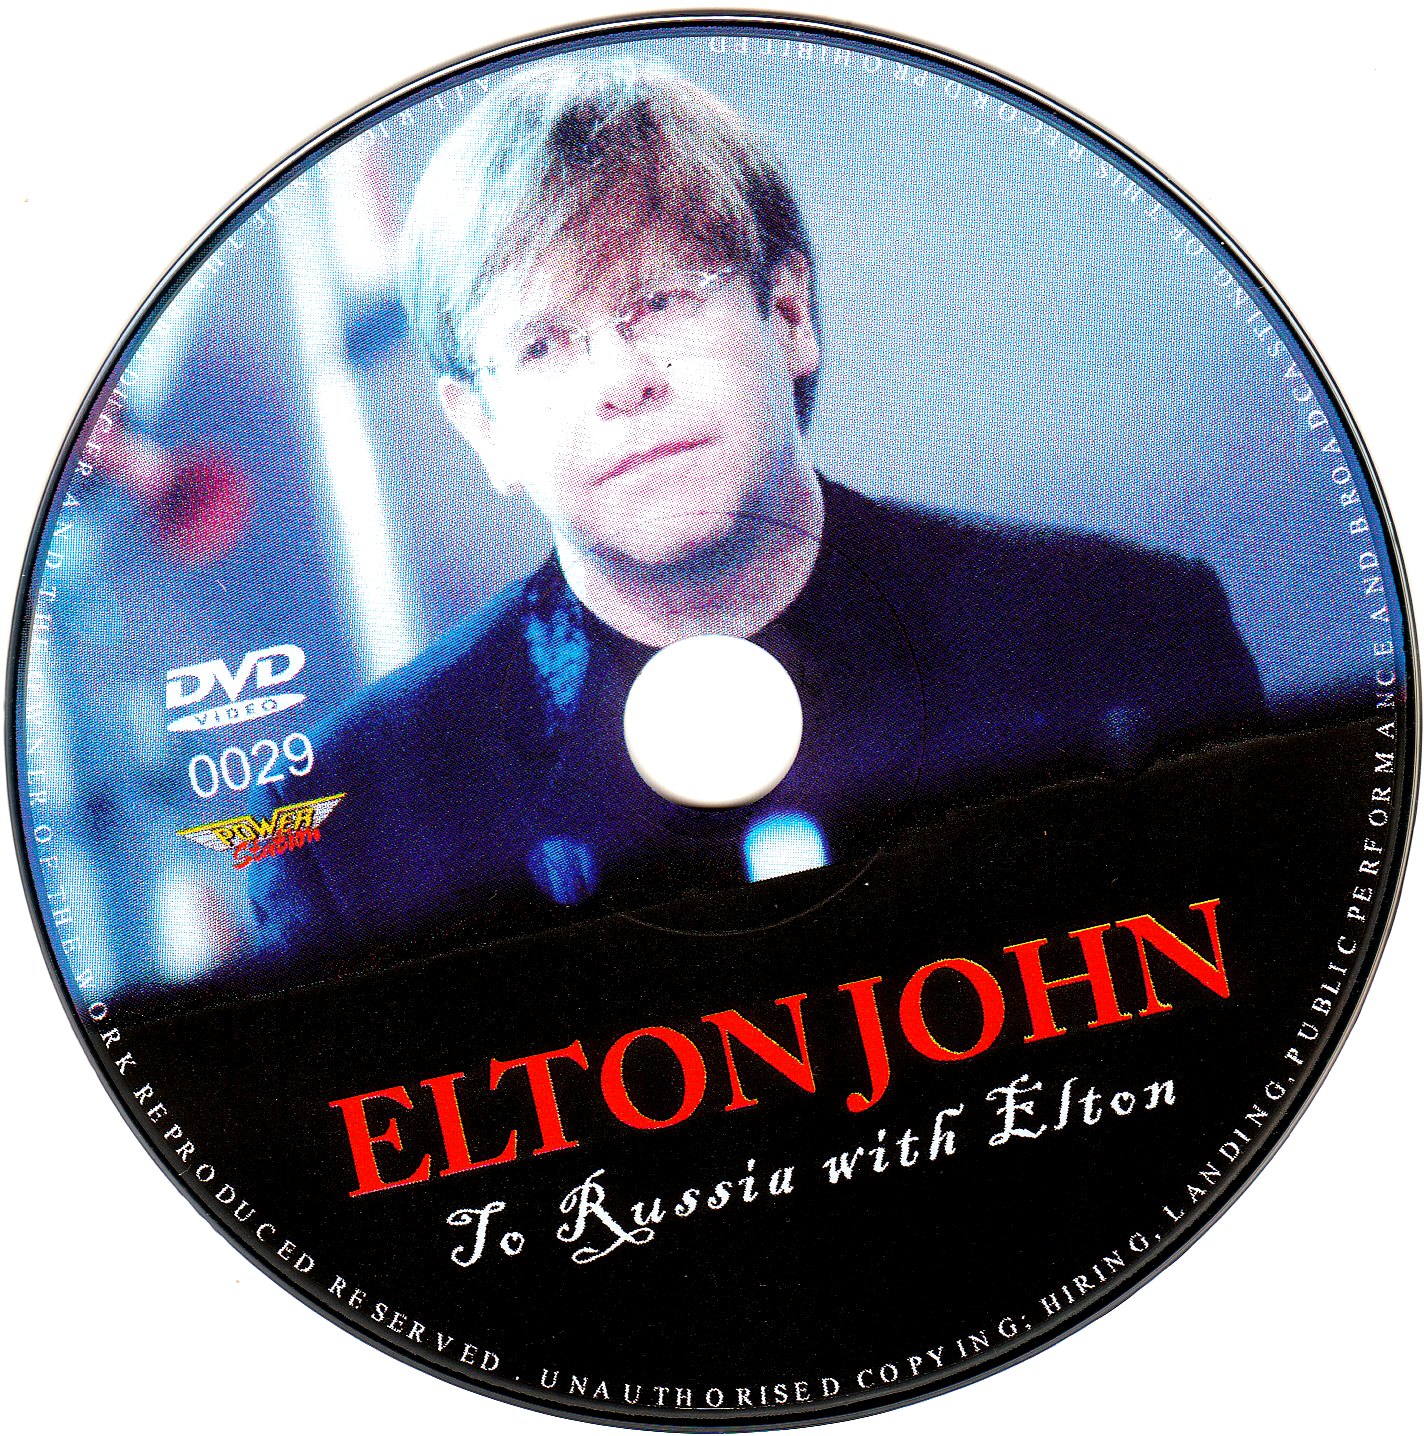 Elton John to Russia with Elton live in concert 1979